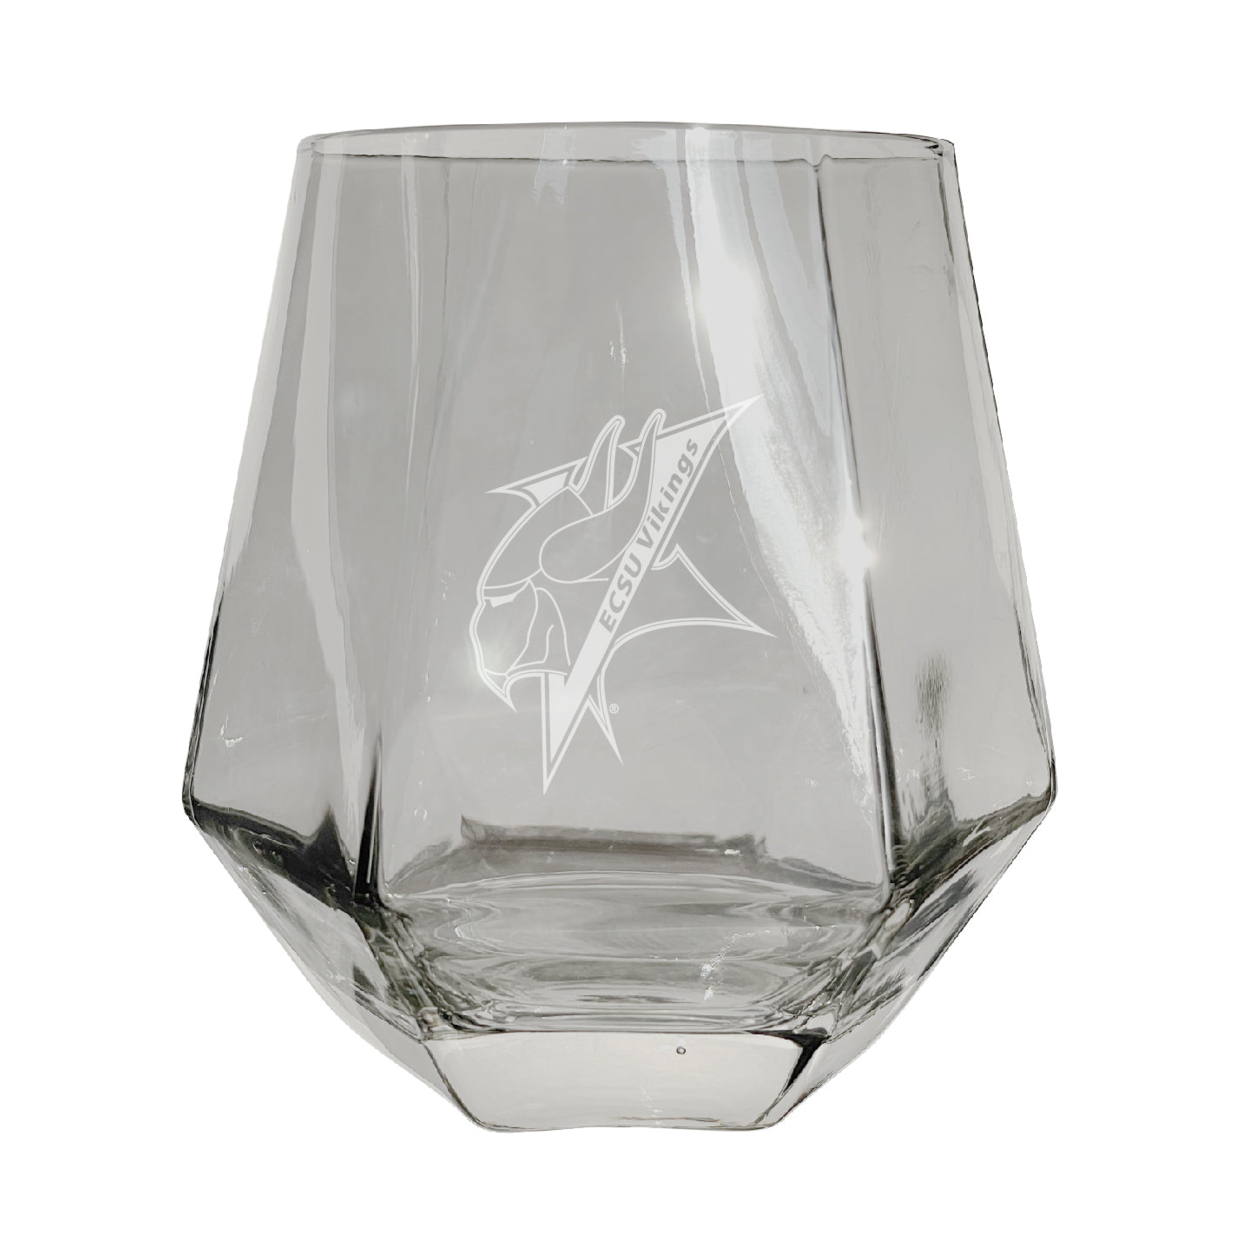 Elizabeth City State University Etched Diamond Cut Stemless 10 Ounce Wine Glass Clear